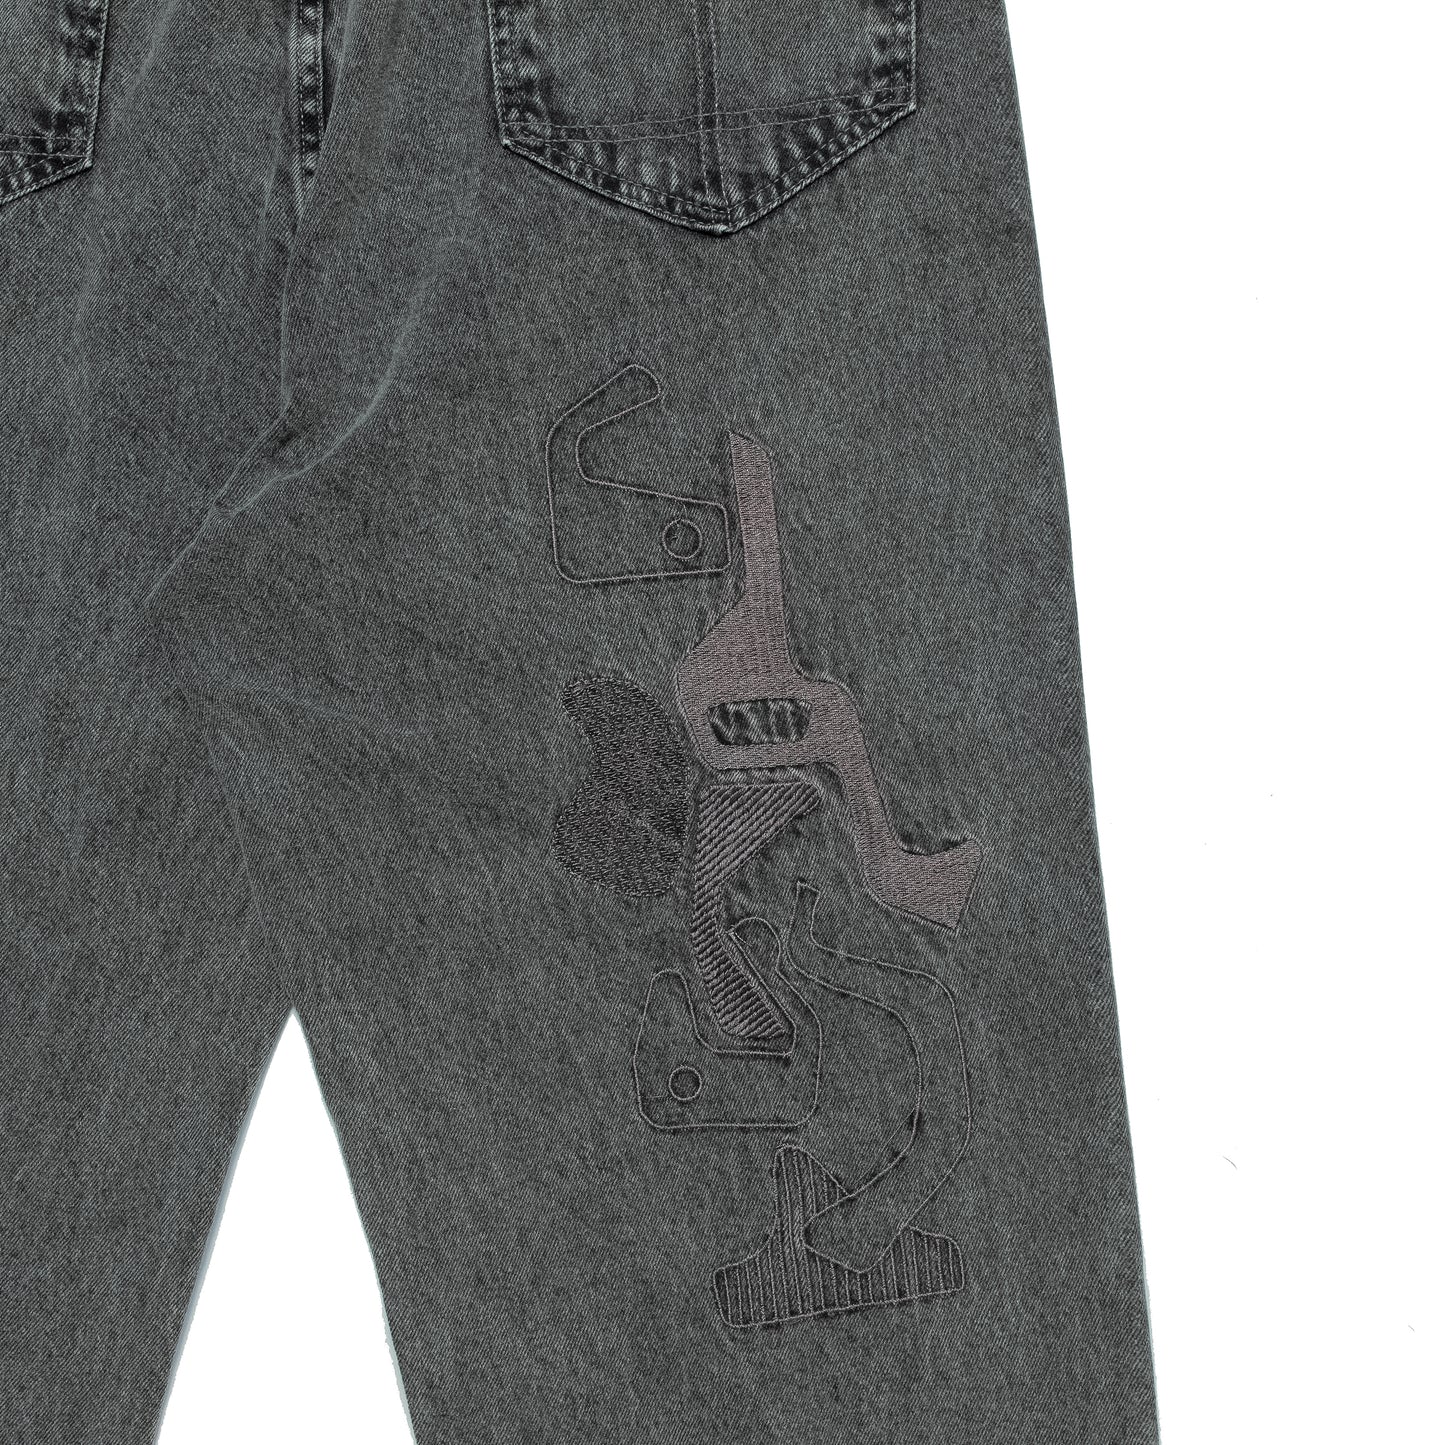 Jeans Pants "Brutalism" Gray Marble